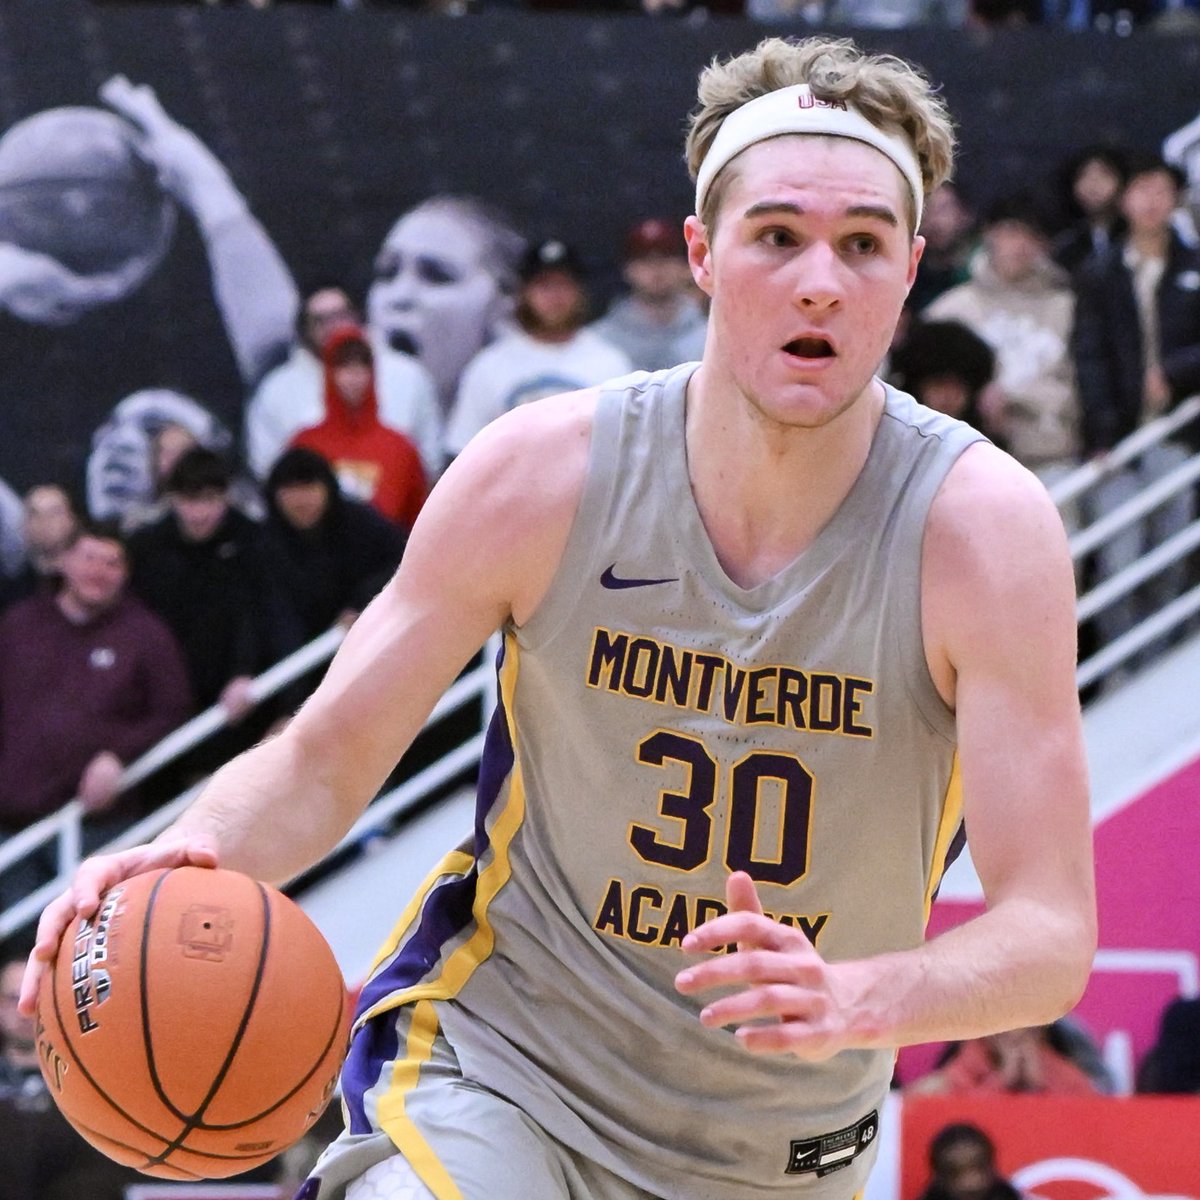 NEWS: Liam McNeeley, a top-10 recruit and the top available high school prospect in 2024, has committed to UConn, he told ESPN. 'It felt like a perfect fit. There's no reason we can't contend for a three-peat.'